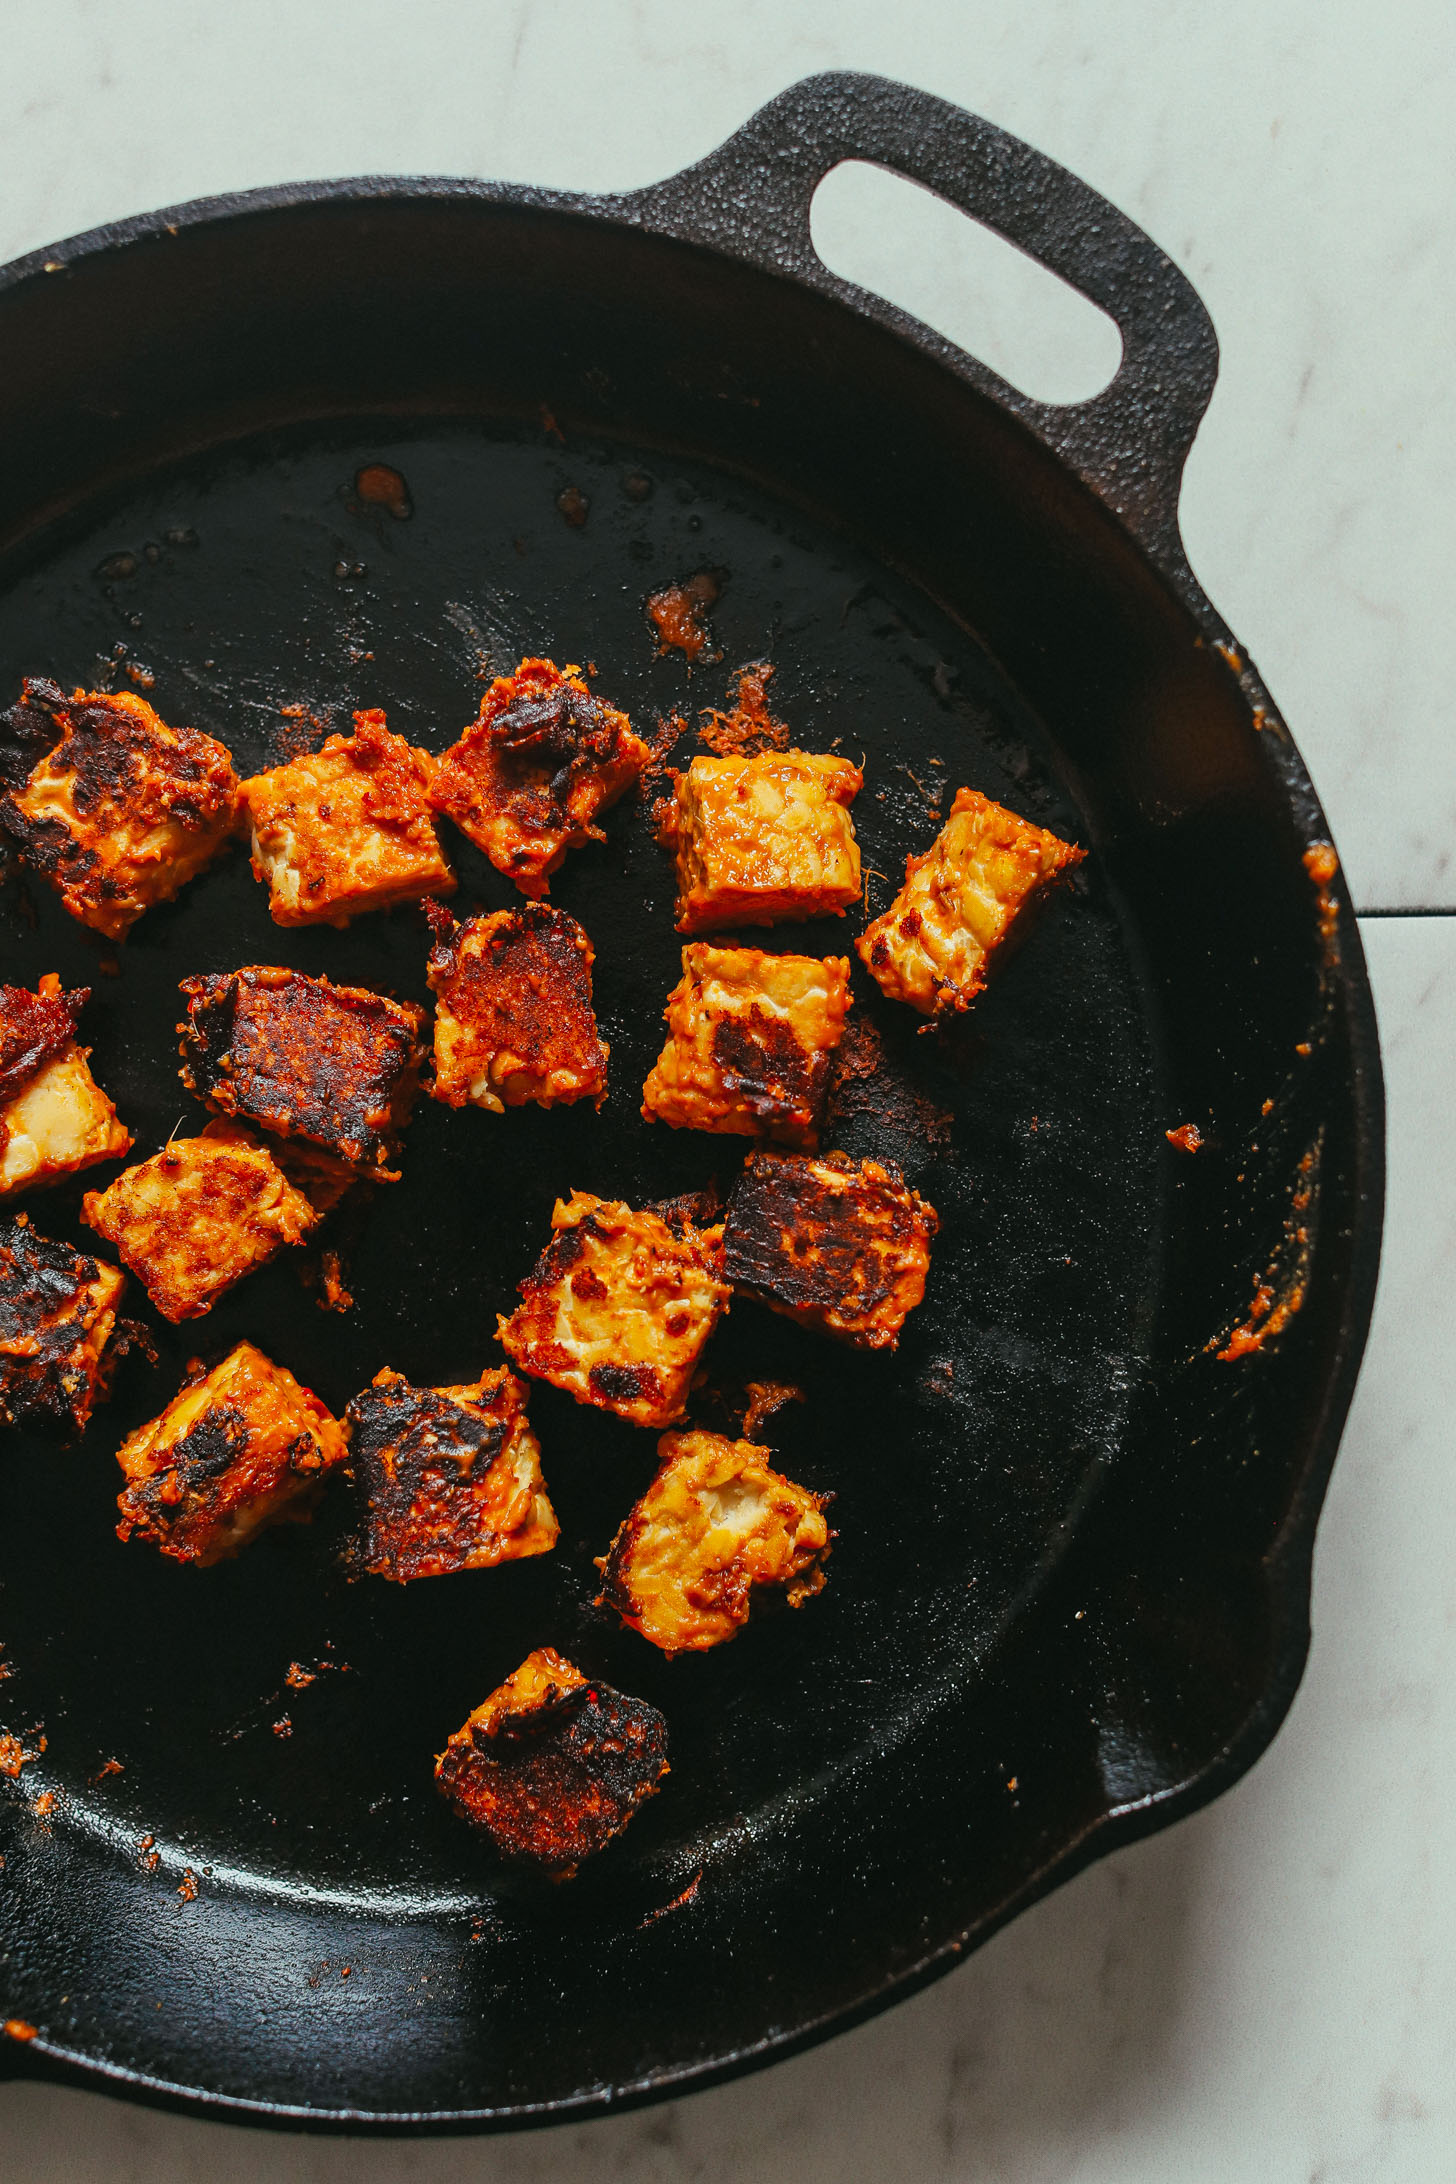 Overhead image of tempeh being stir fried in peanut sauce in a cast iron pan